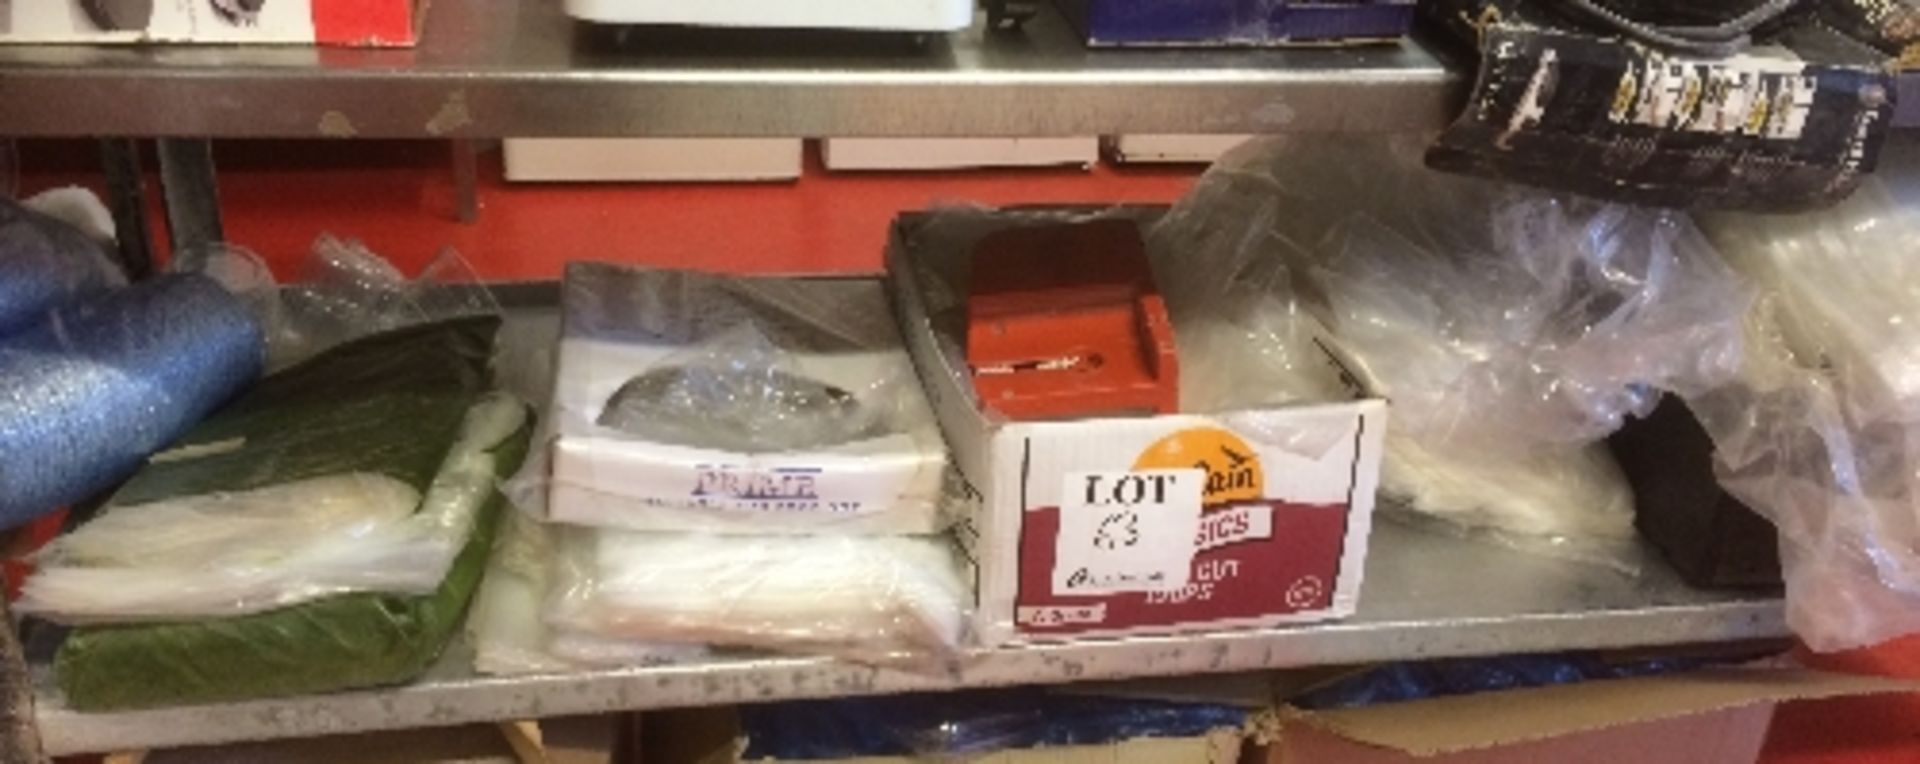 Shelf containing quantity of various sizes of cellophane food packaging bags